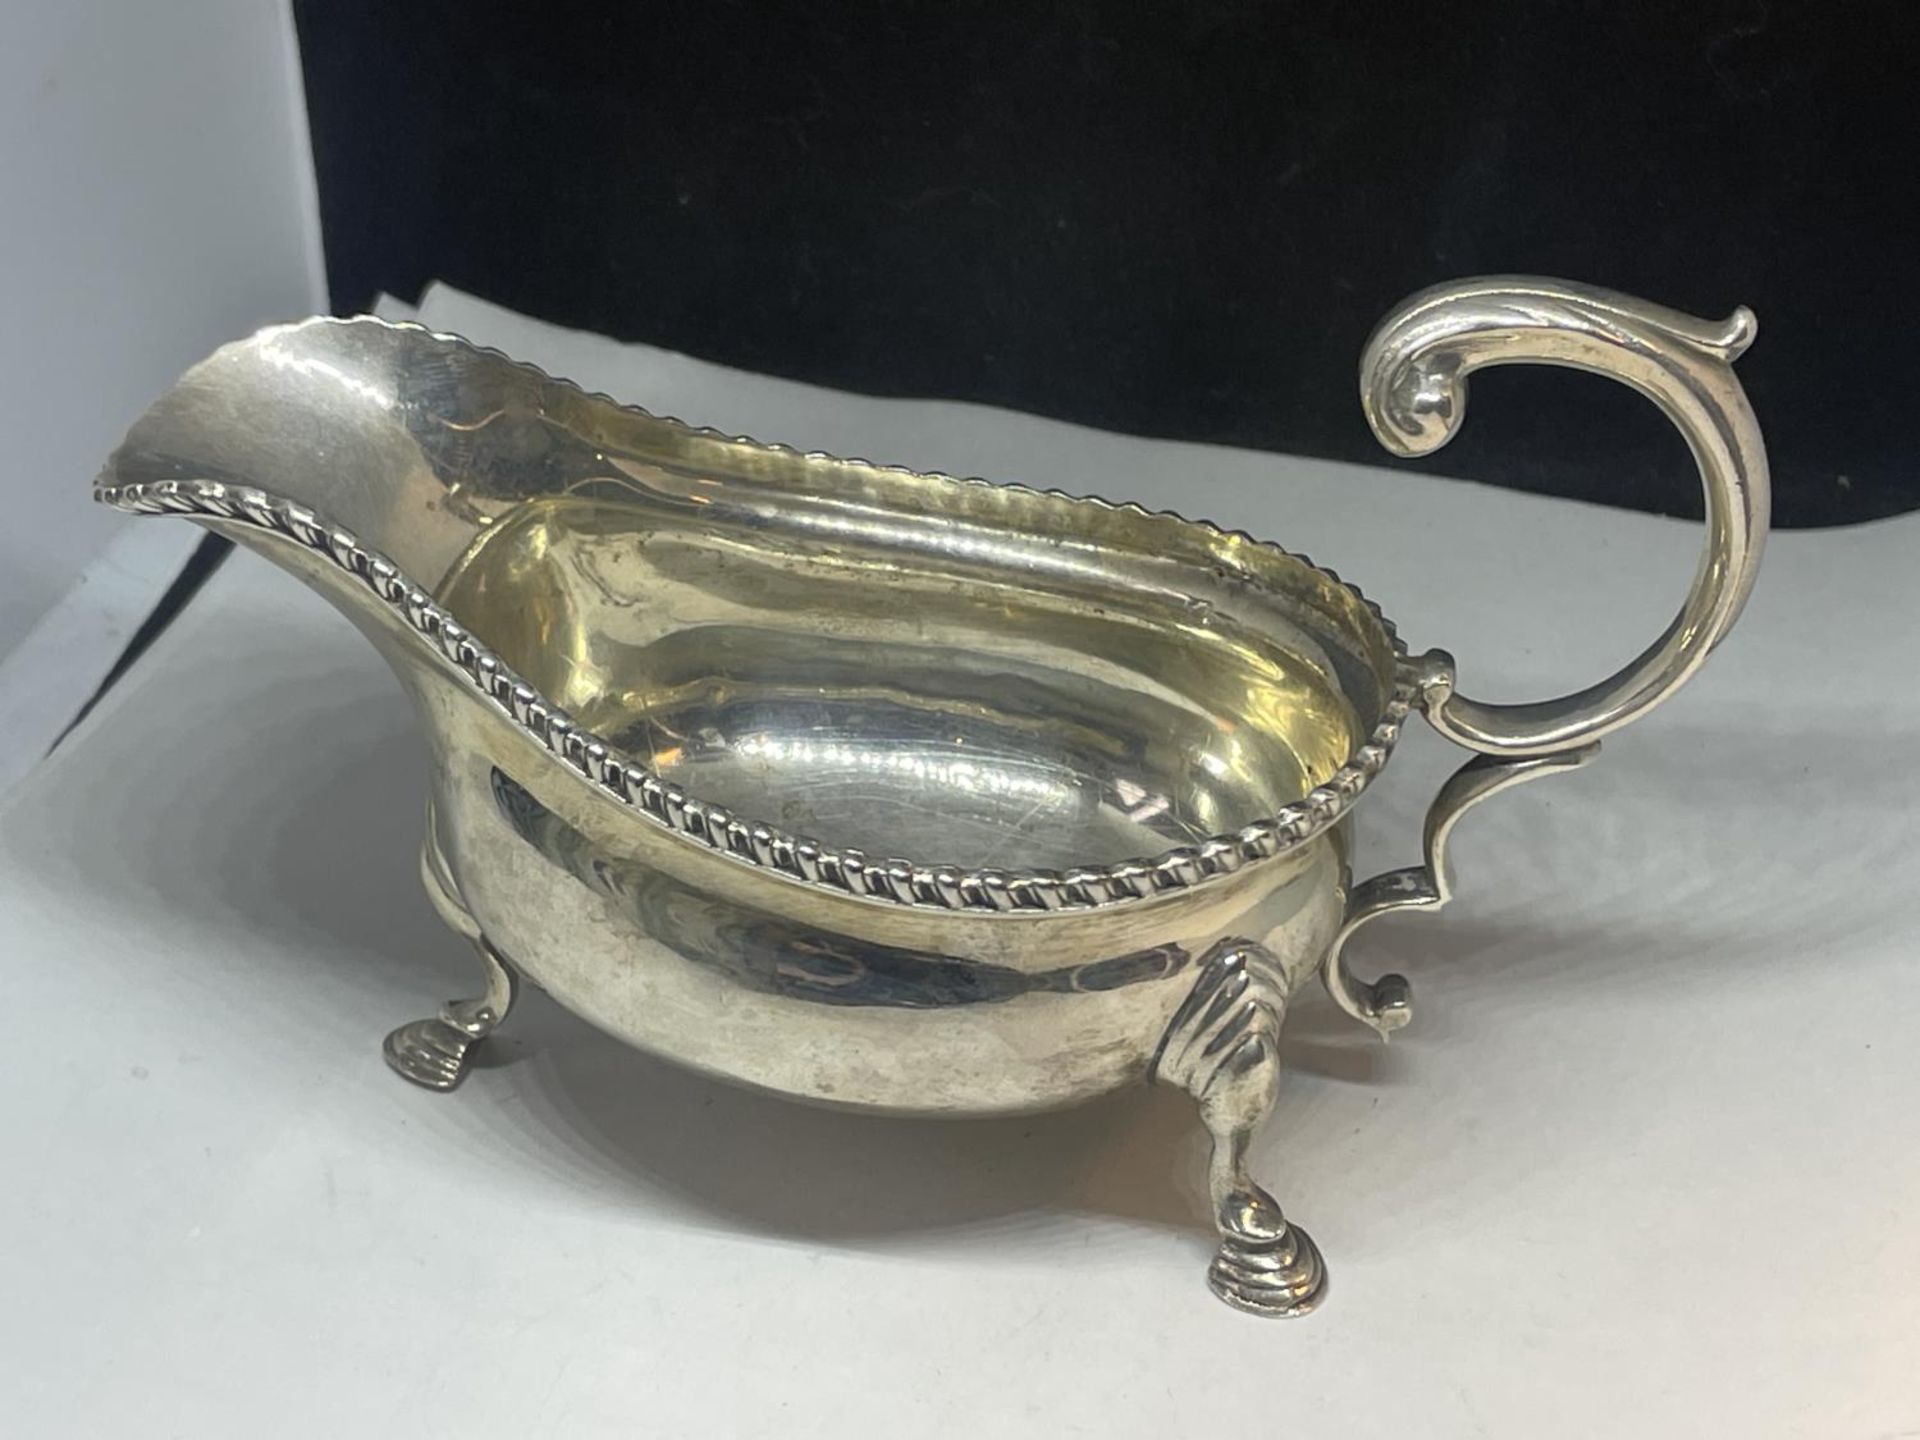 A BOODLE AND DUNTHORNE HALLMARKED CHESTER SILVER SAUCE BOAT GROSS WEIGHT 145.1 GRAMS - Image 3 of 4